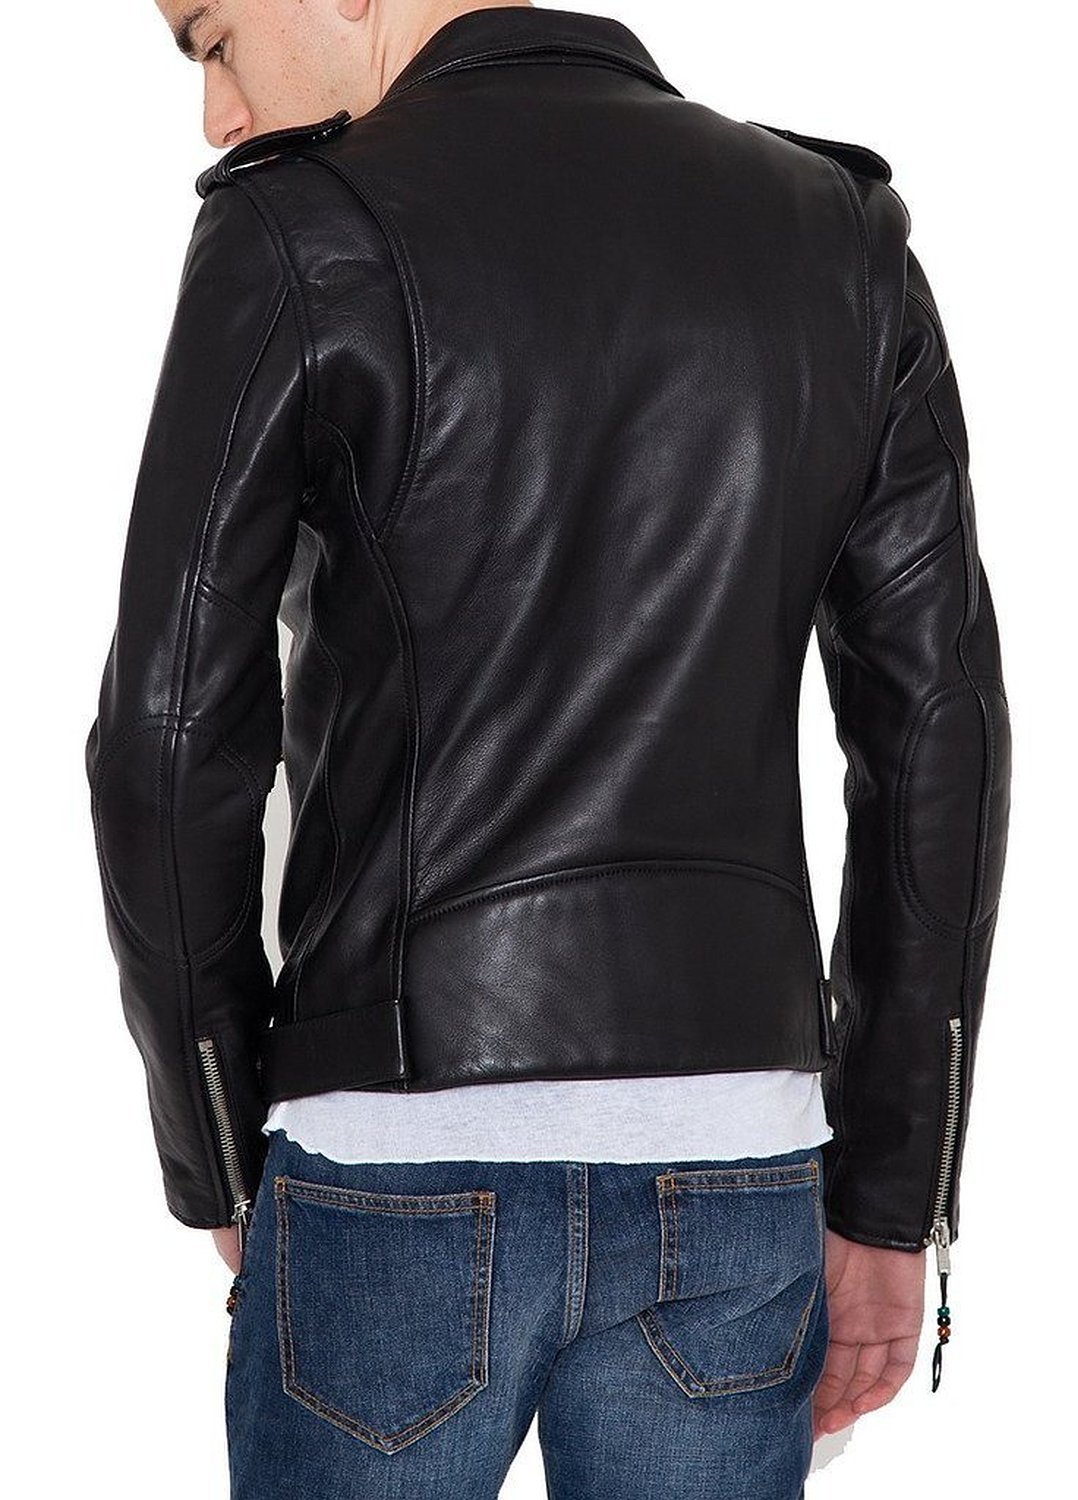 Mens Leather Jacket Faux Leather With Shoulder Epaulets Biker Style ...